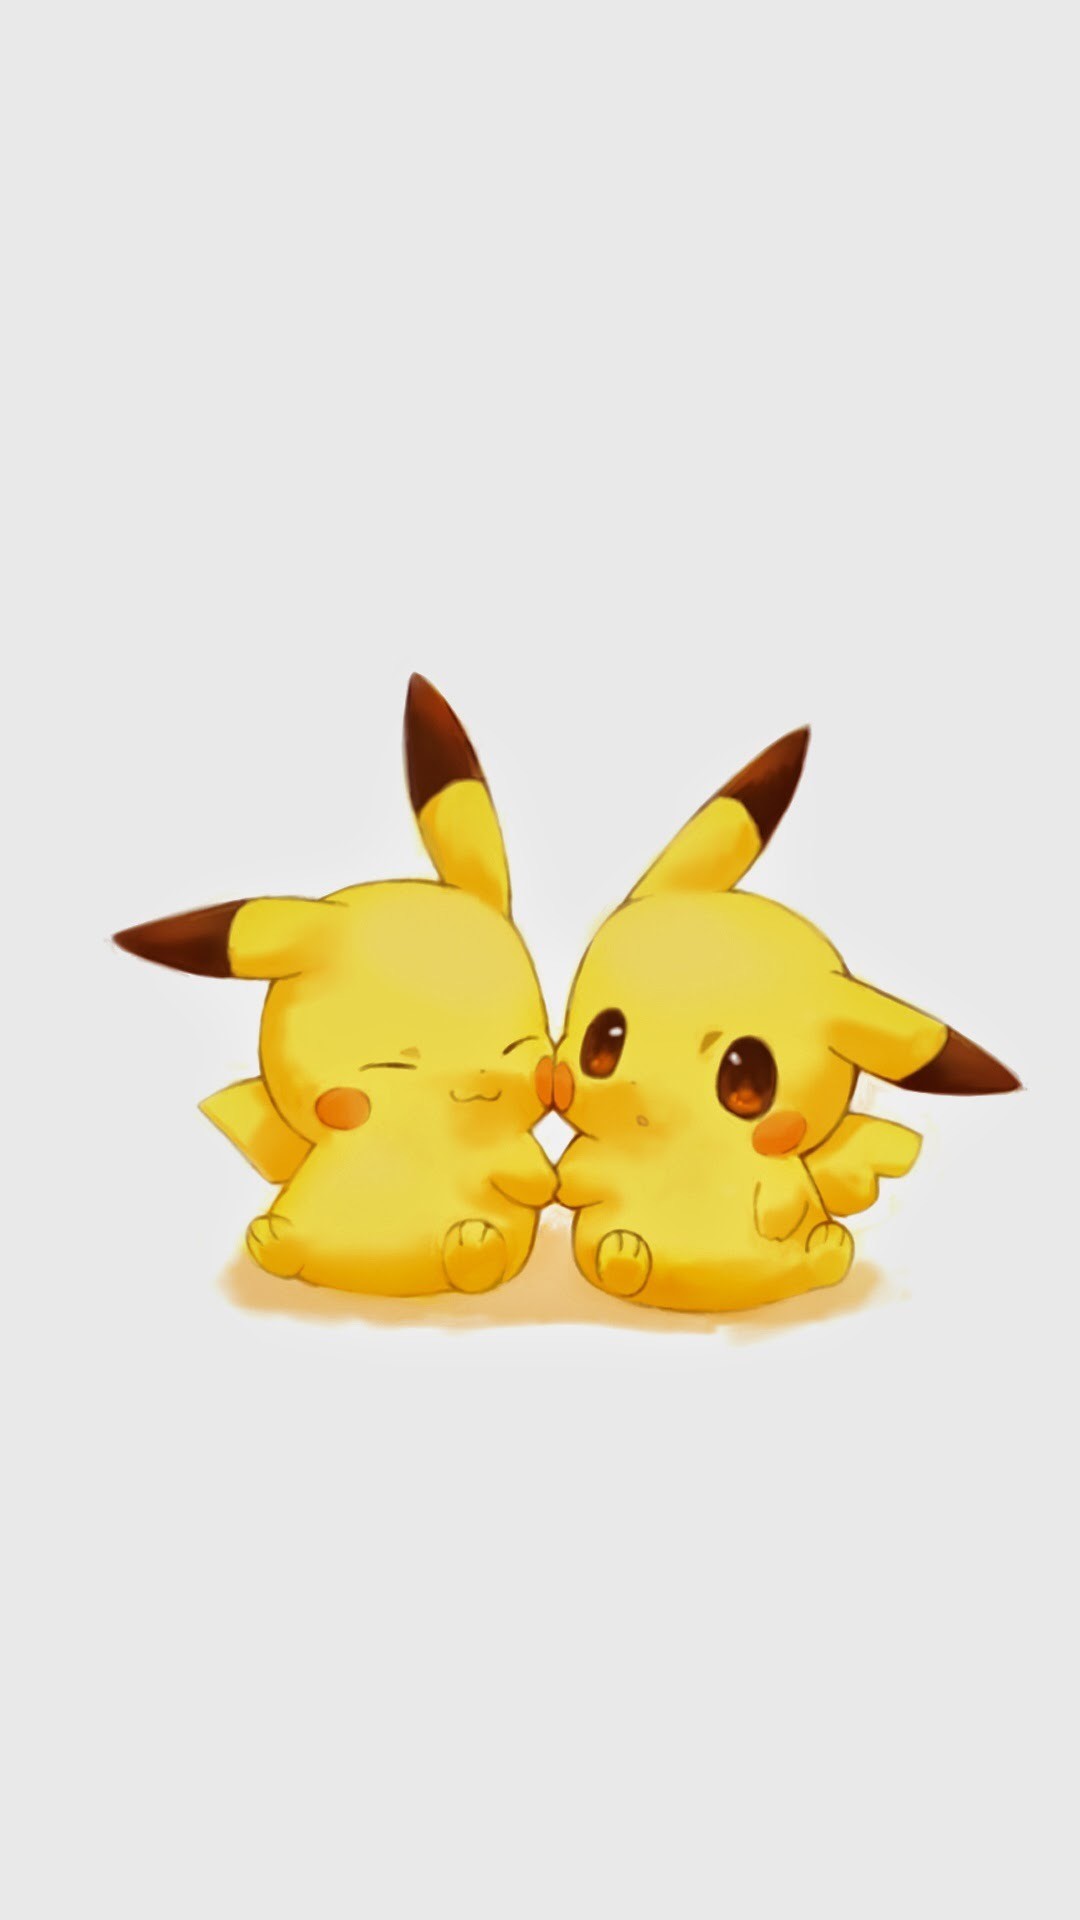 1080x1920  Tap image for more funny cute Pikachu wallpaper! Pikachu -  @mobile9 | Wallpapers